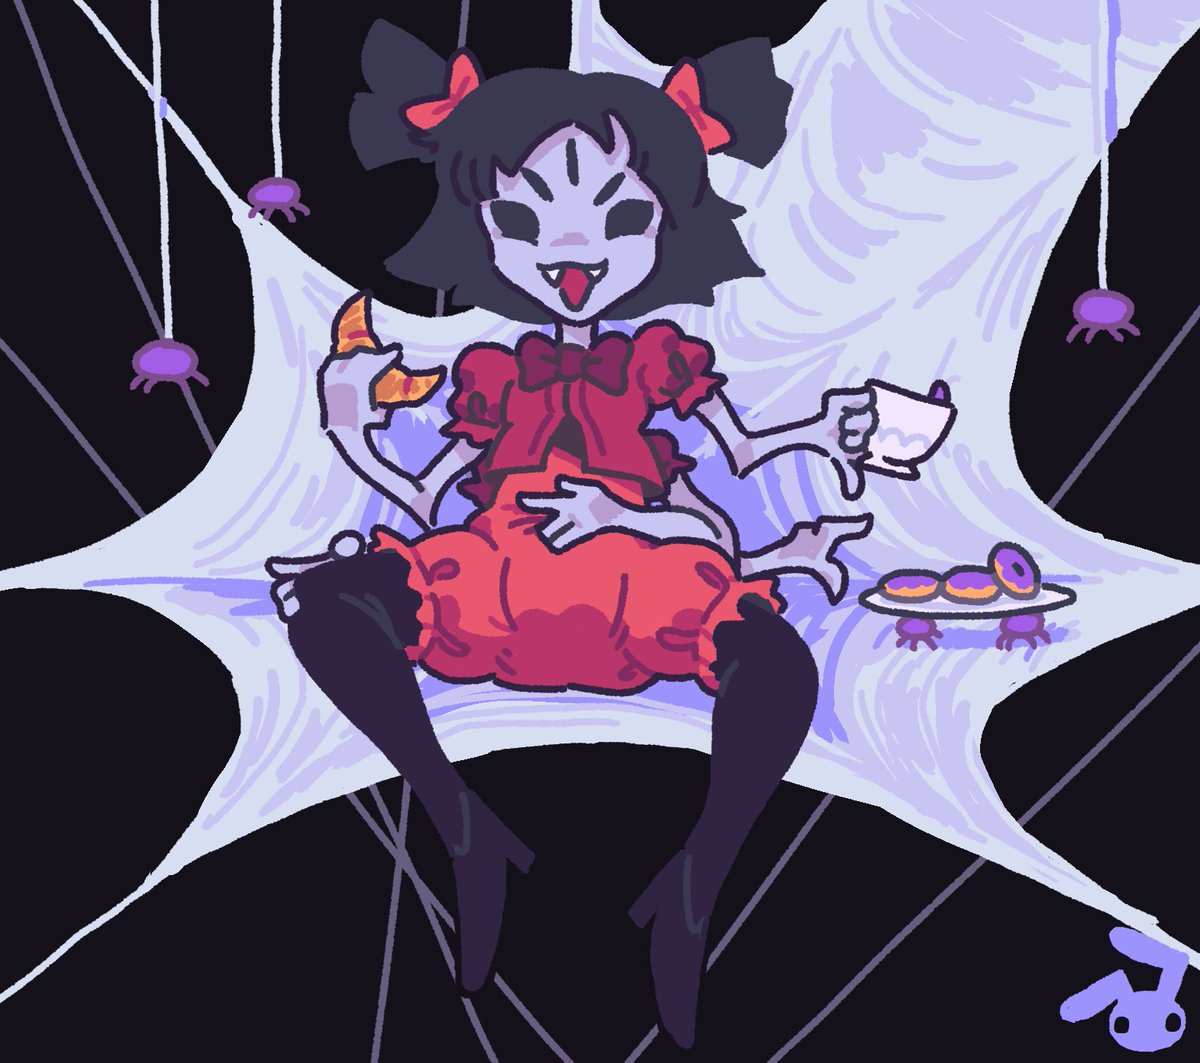 Muffet from Undertale all pampered up and enjoying some baked spider goods